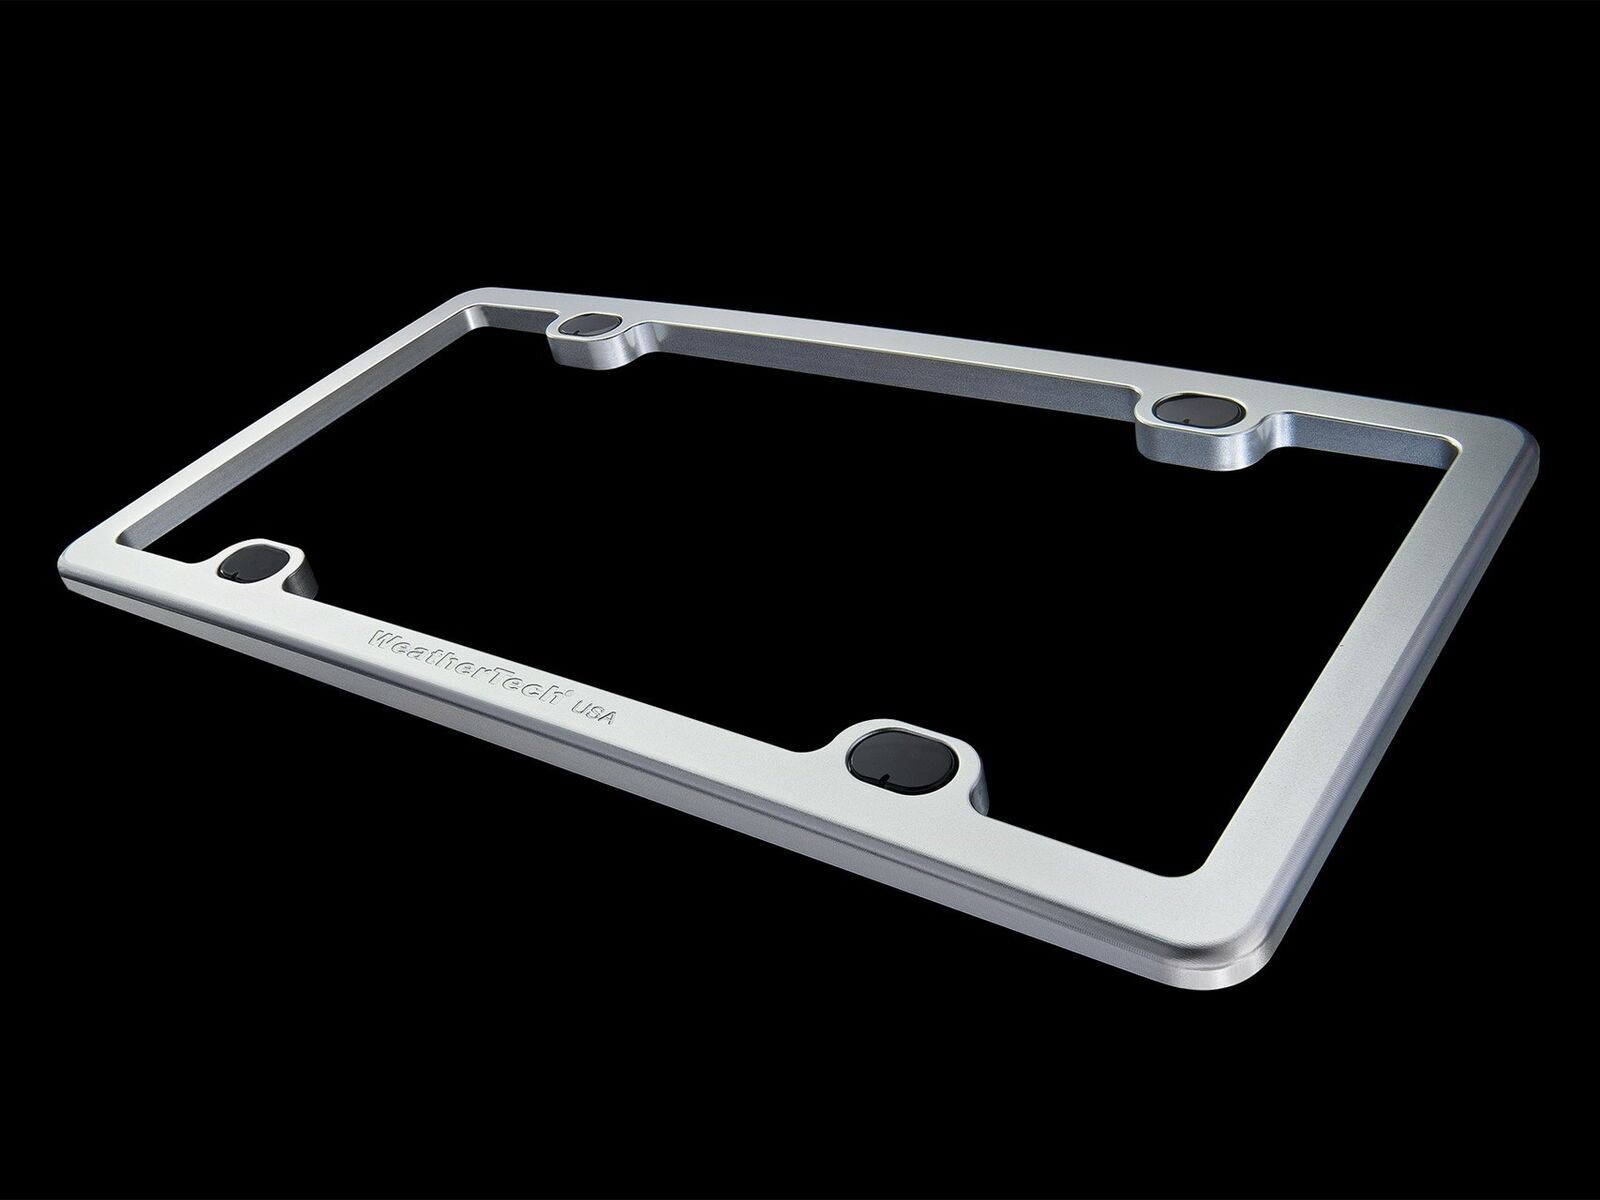 WeatherTech Billet Aluminum License Plate Frame For Cars - Clear Bright Silver